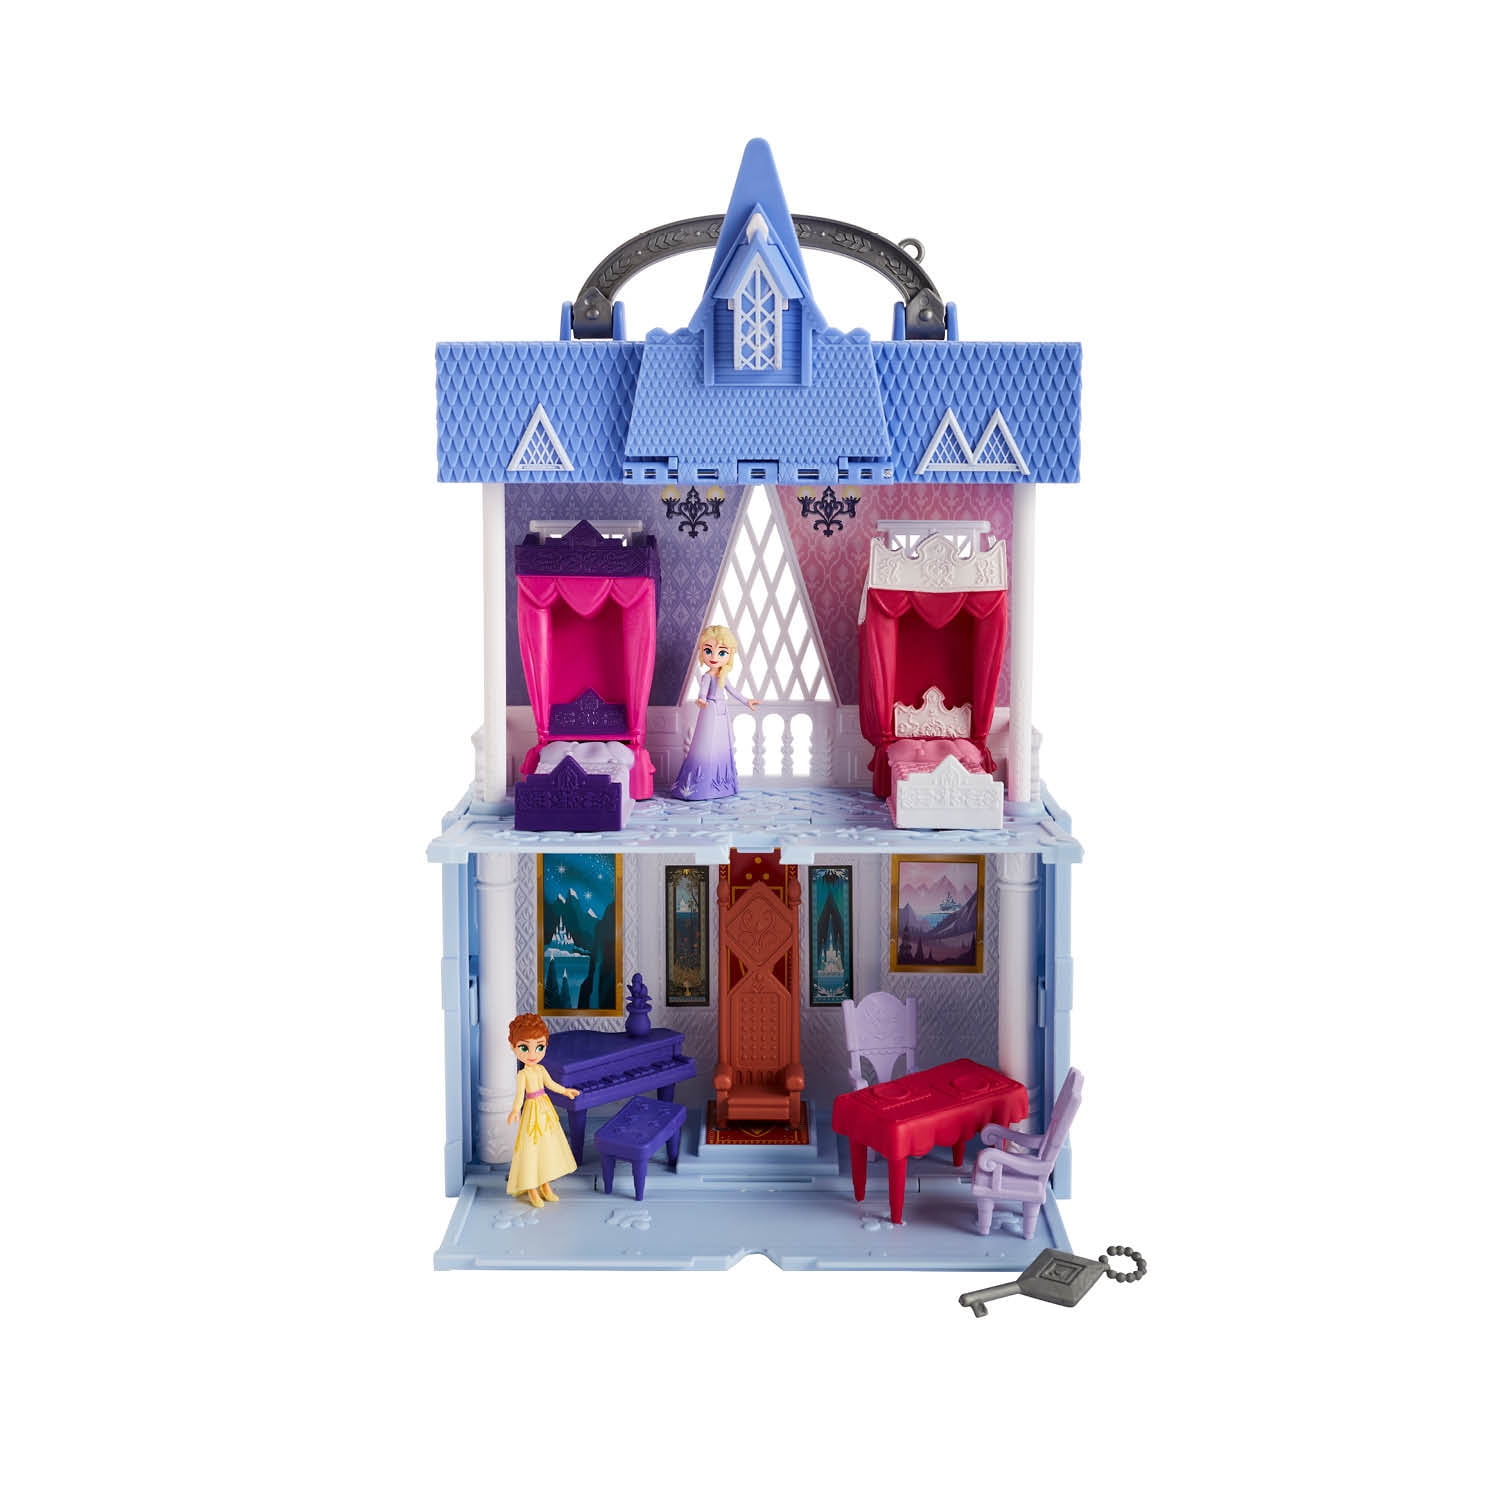 Disney Frozen 2 Pop Adventures Family Game Night Pop-Up Playset with Handle Toy Inspired 2 Including Anna Doll